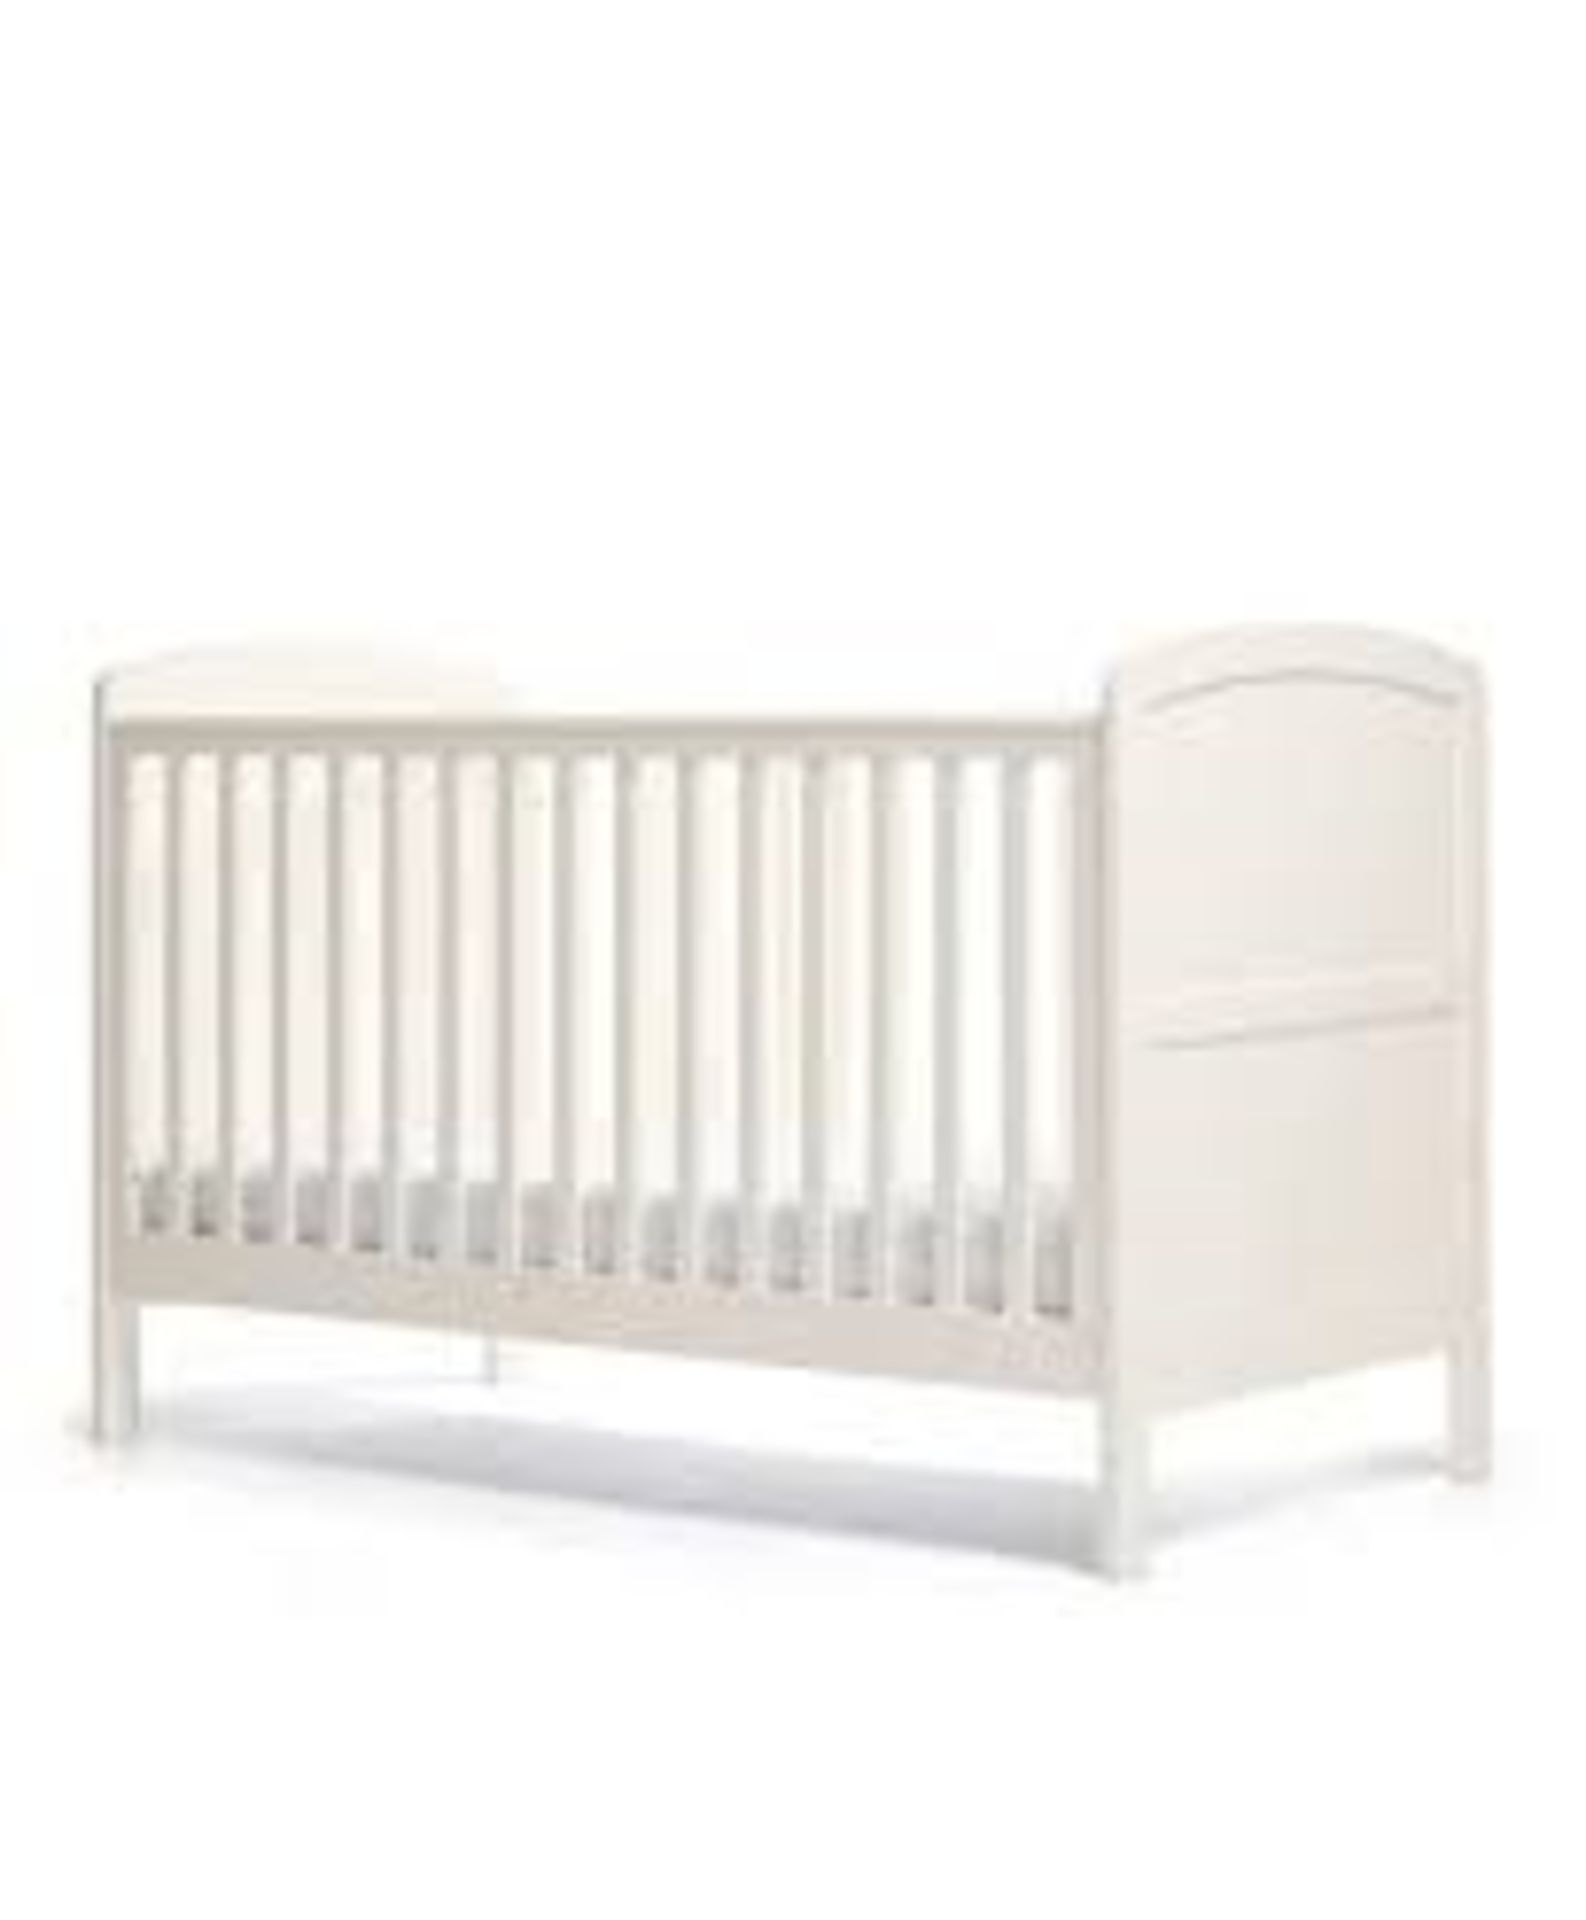 Boxed 140 x 70cm Solid Wooden Cot Bed RRP £140 (Pi